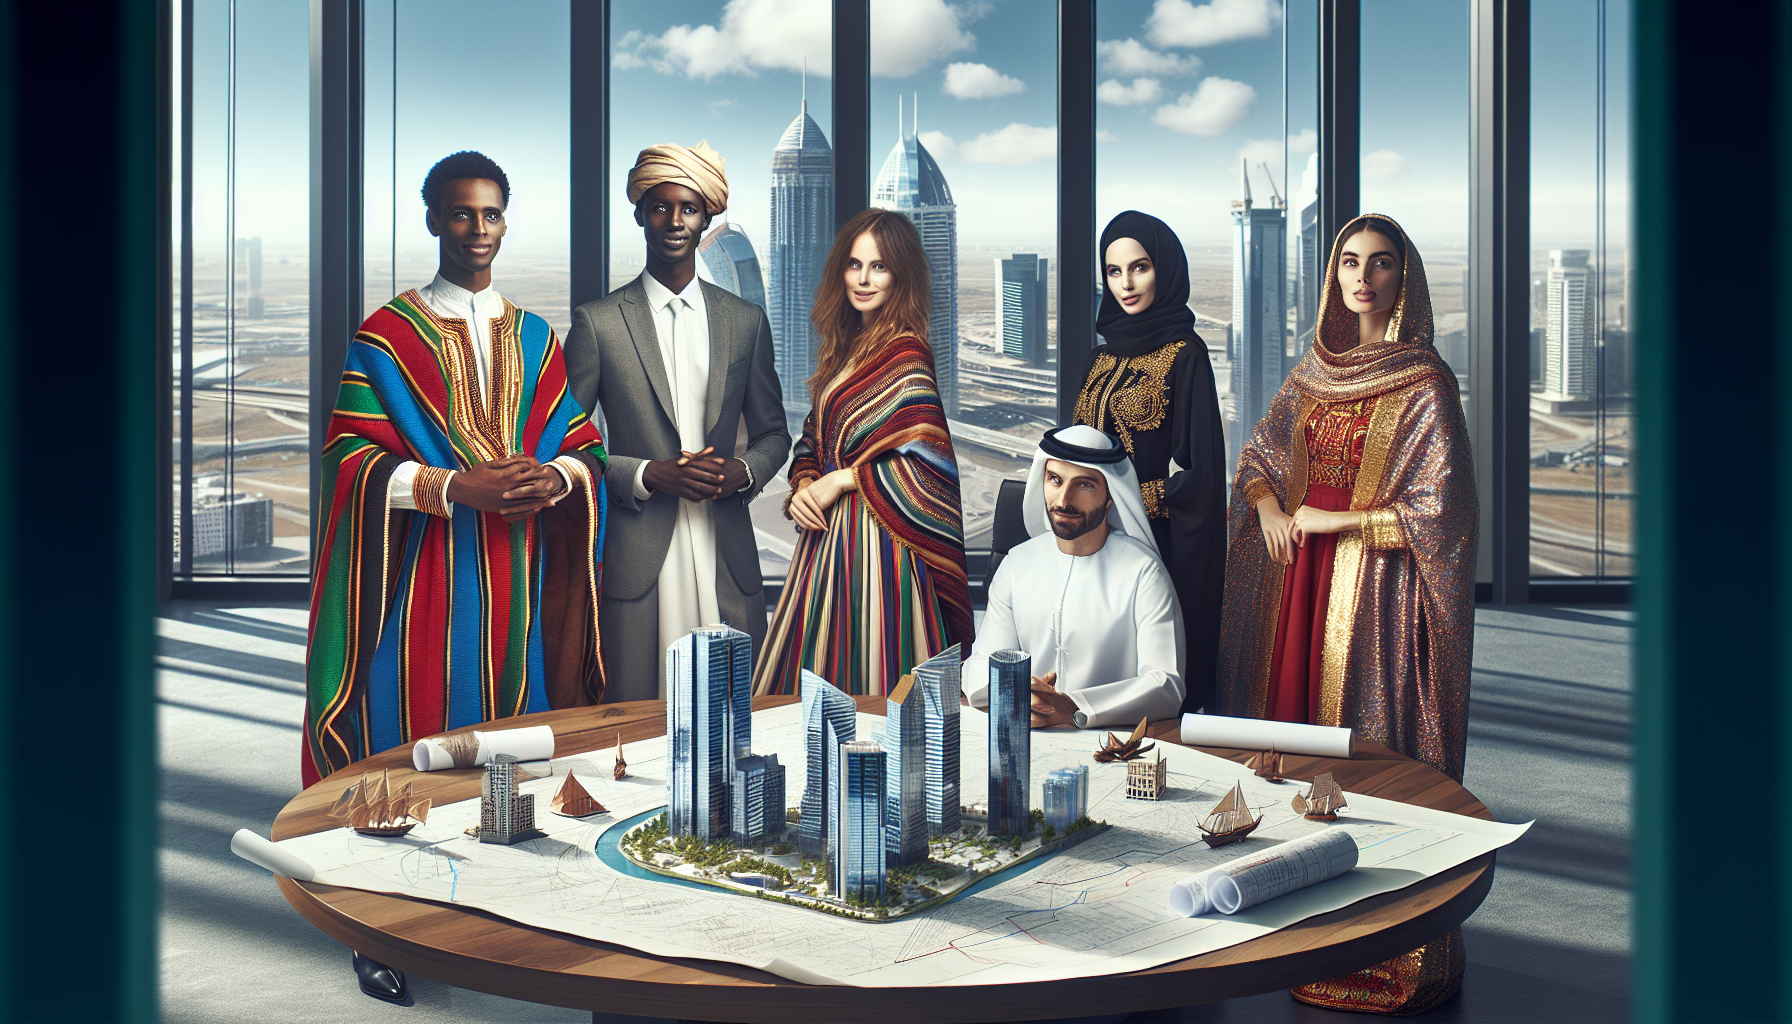 Illustration of a diverse group of people managing real estate investments